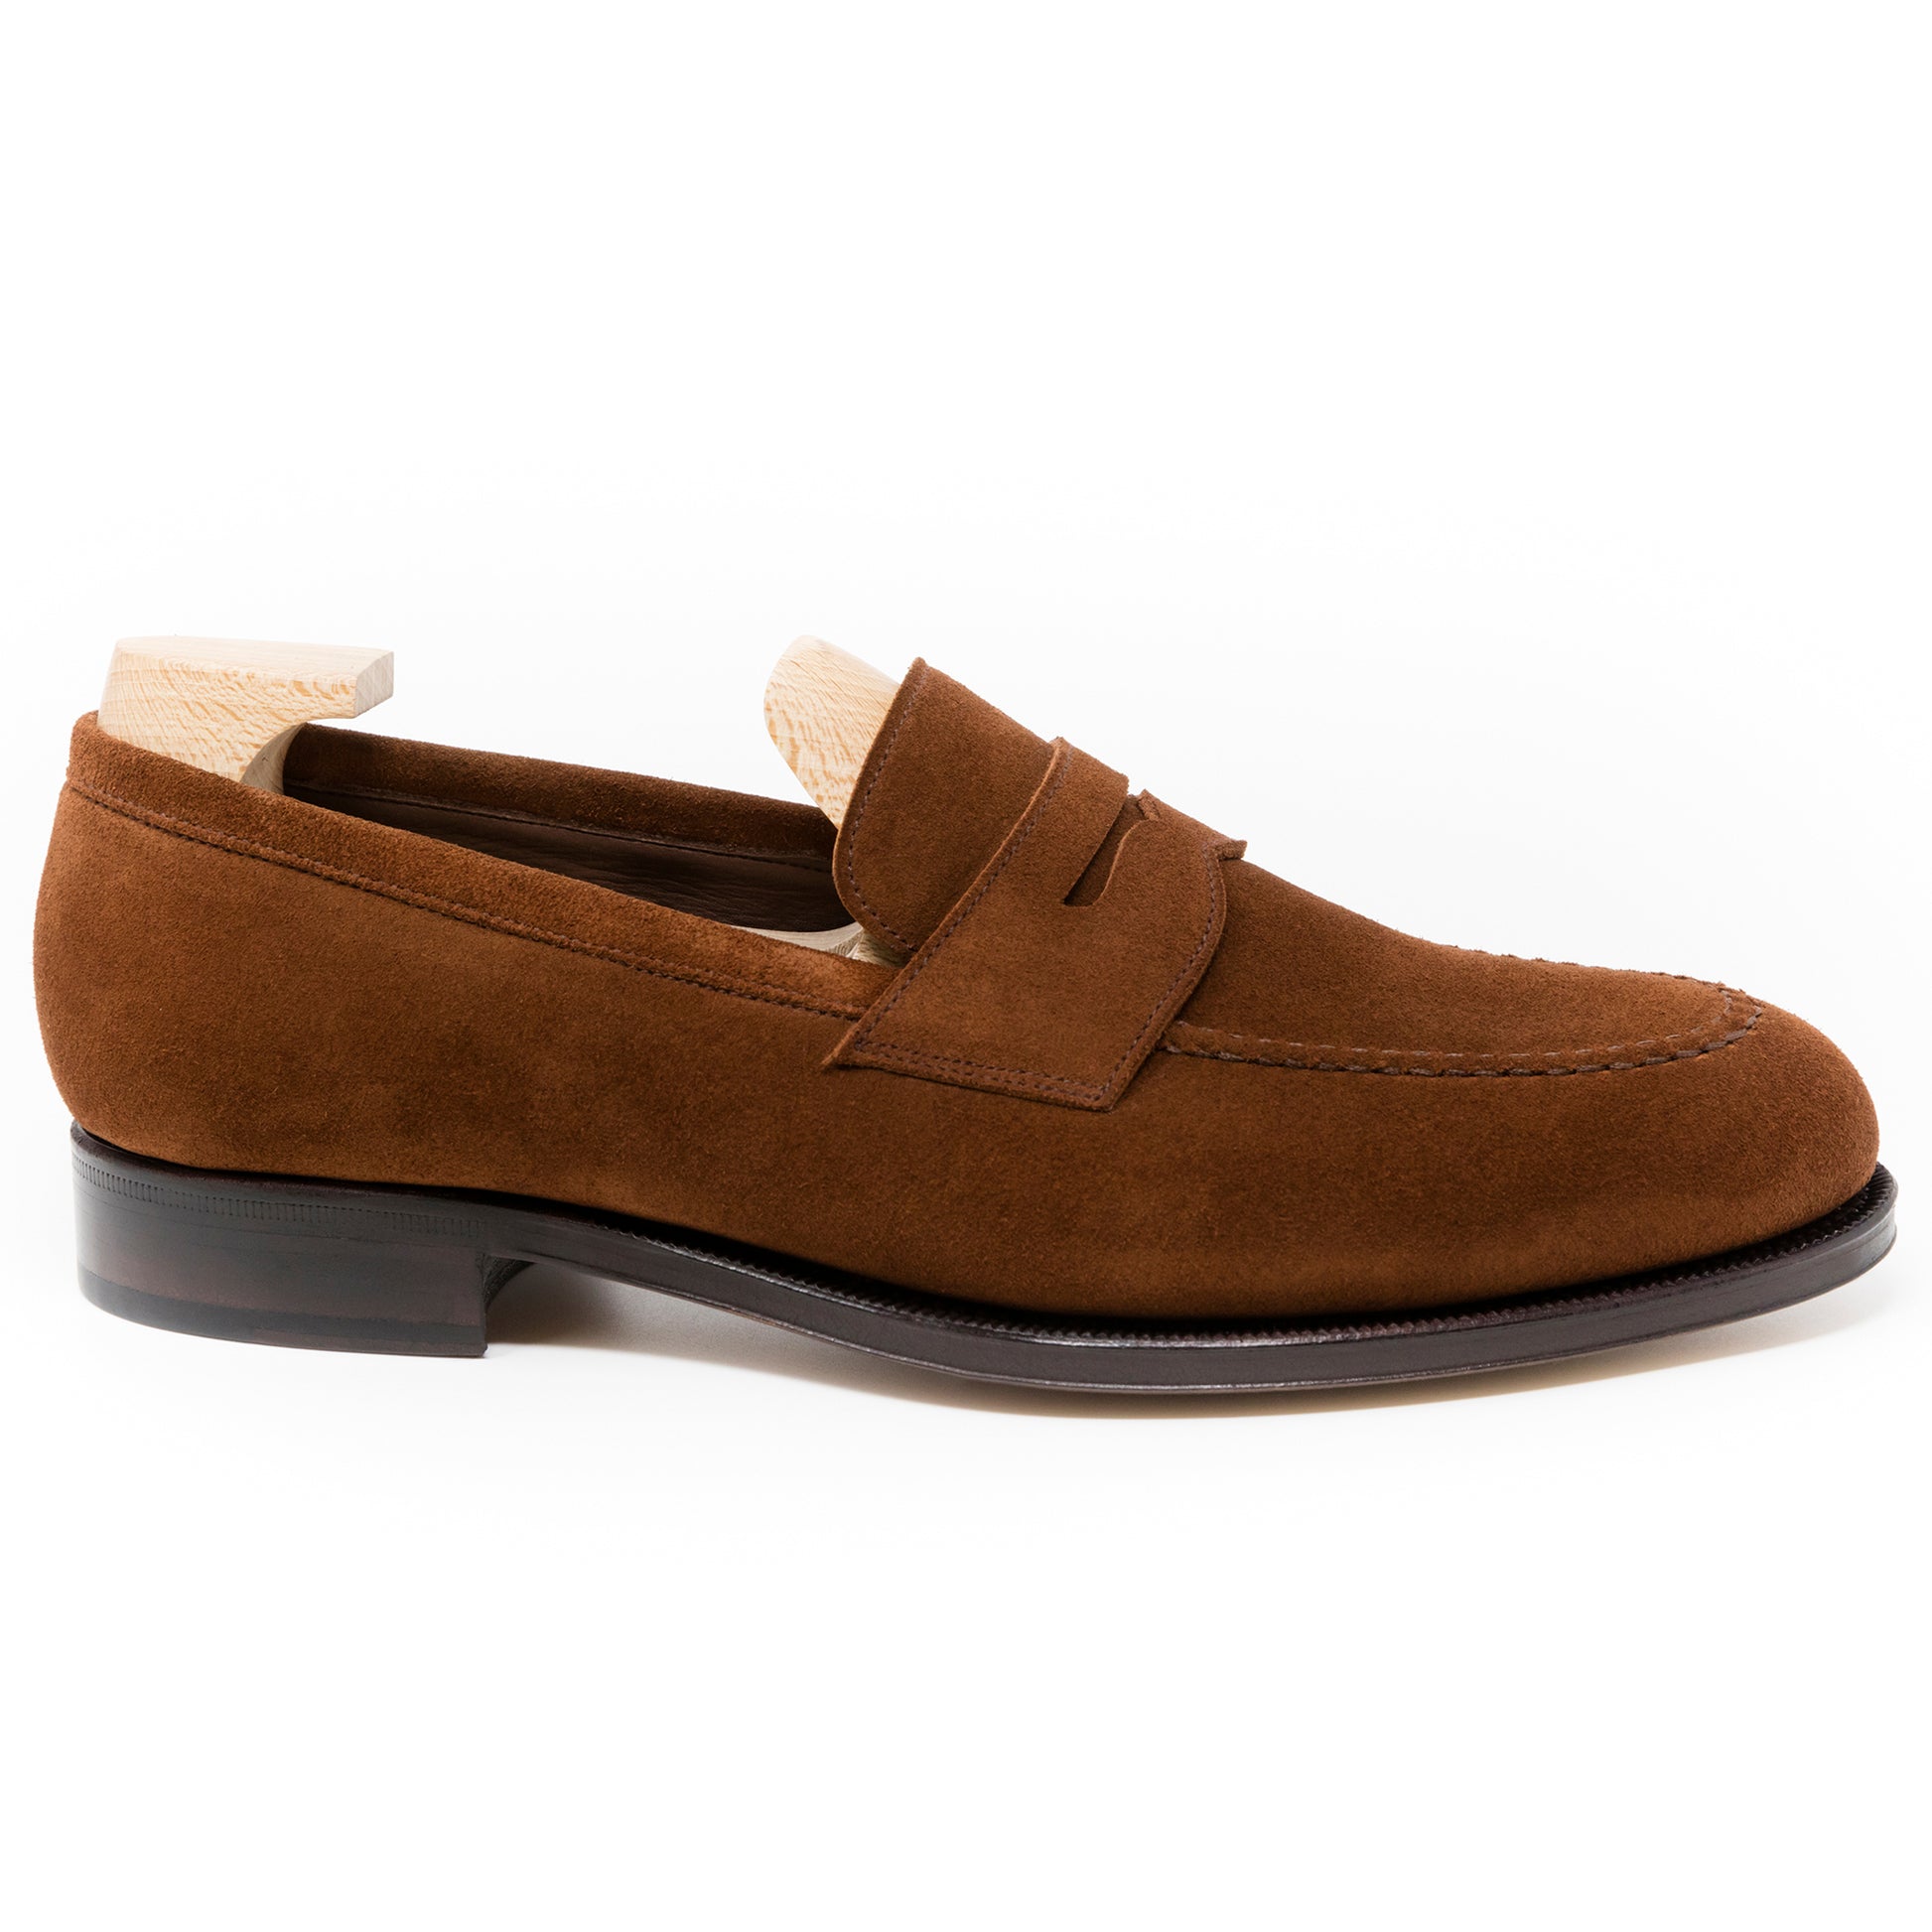 TLB Mallorca leather shoes 545 / JONES / SUEDE POLO BROWN